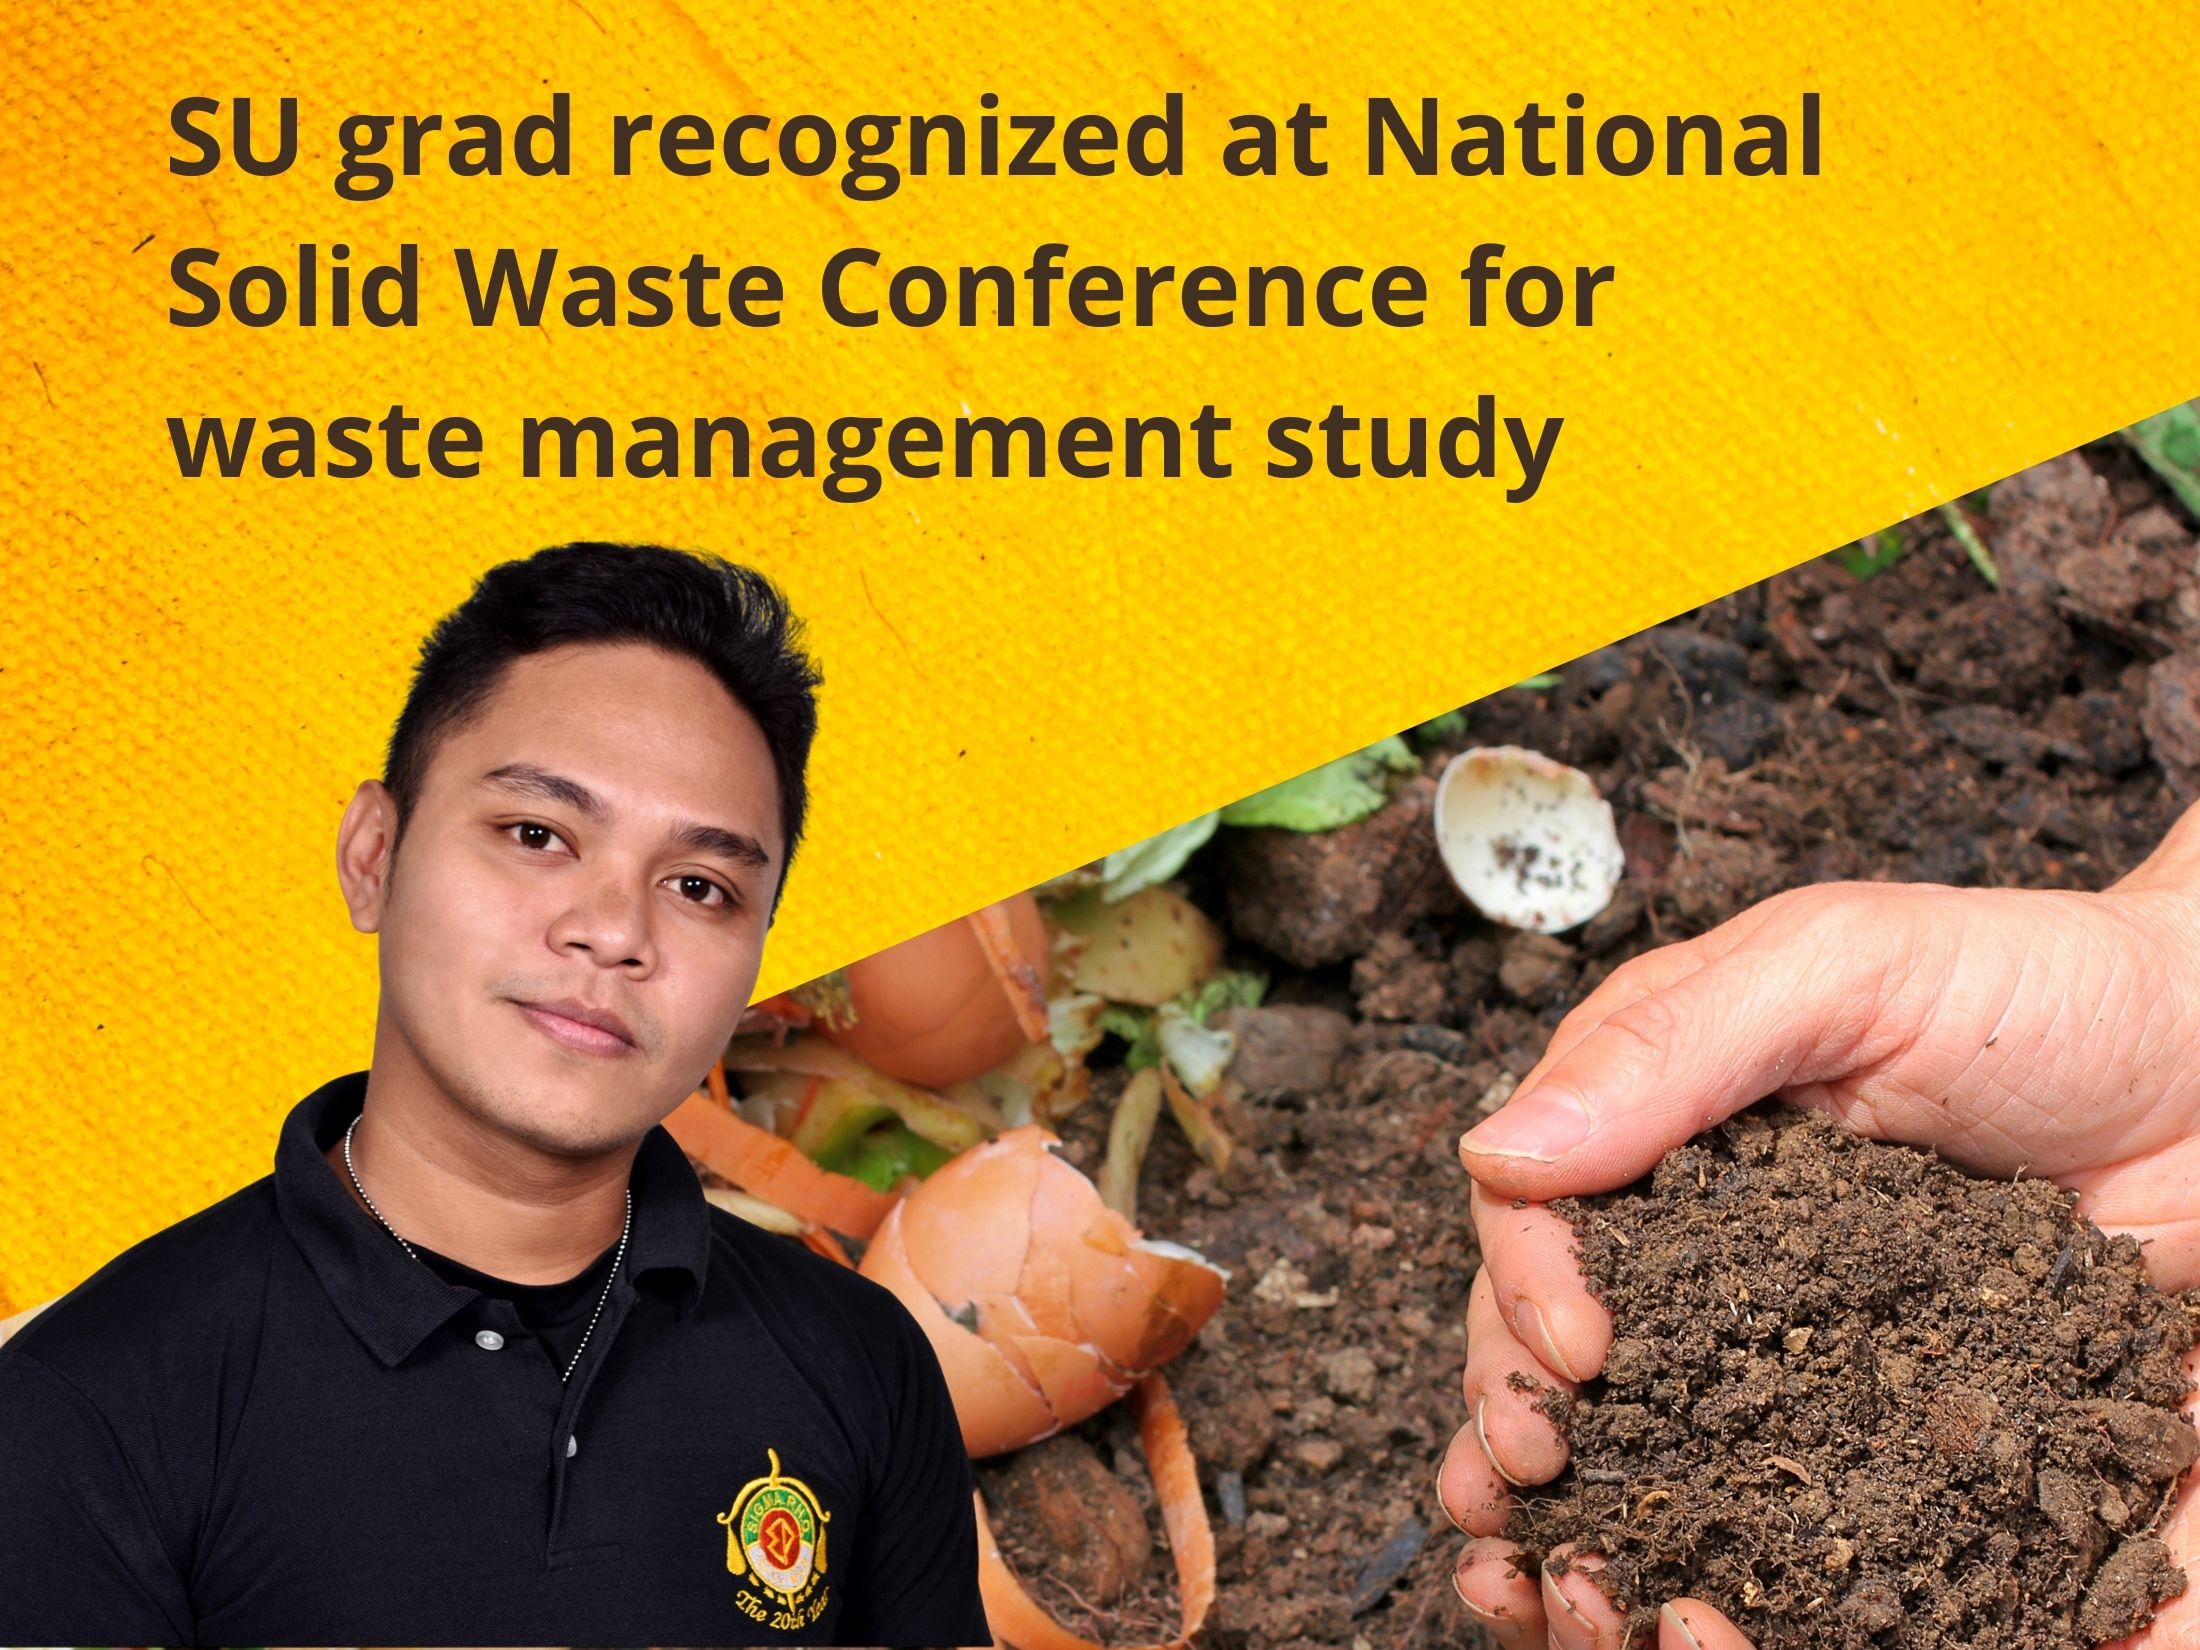 SU grad recognized at National Solid Waste Conference for waste management study